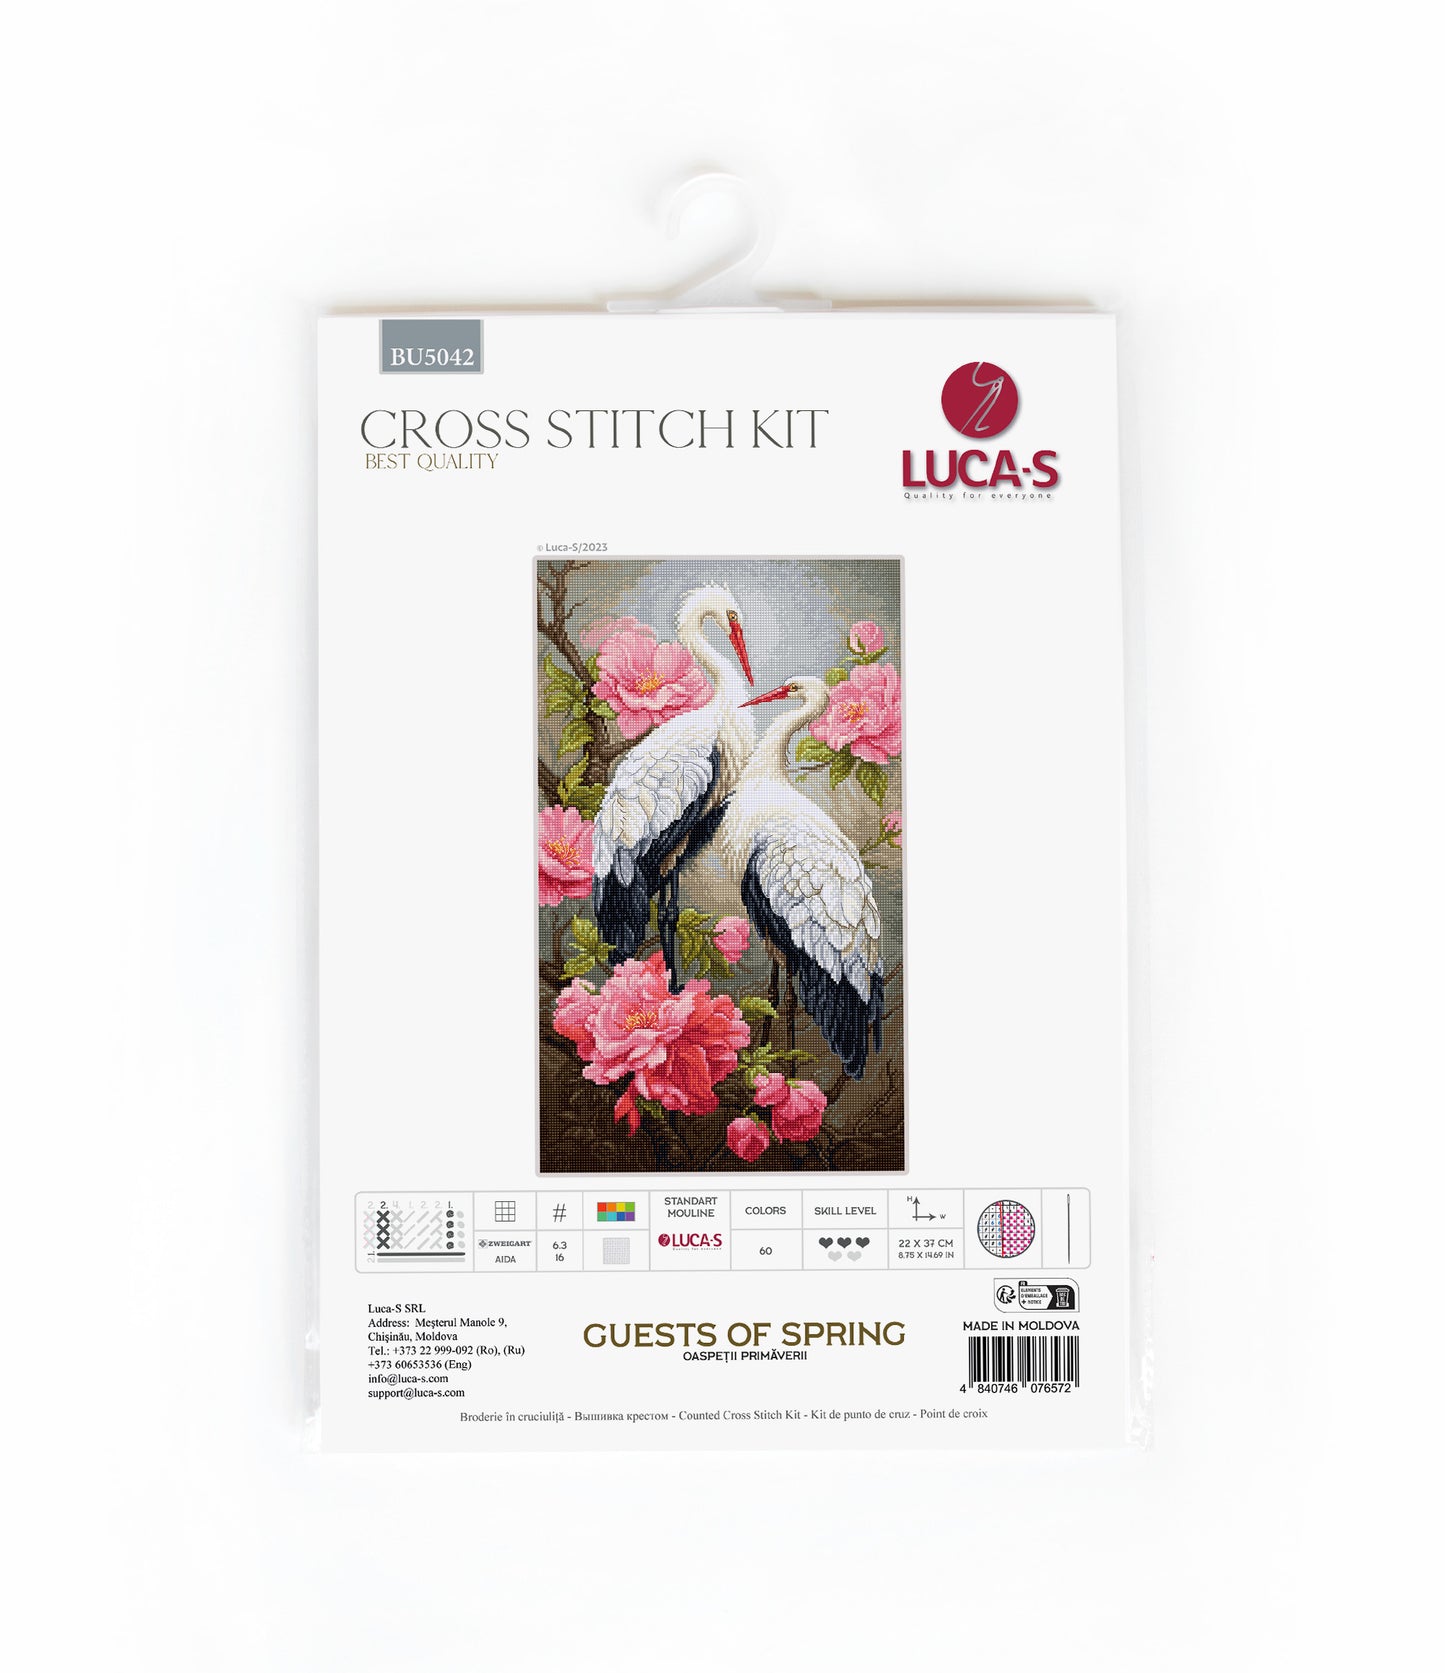 Cross Stitch Kit Luca-S - Guests of Spring, BU5042